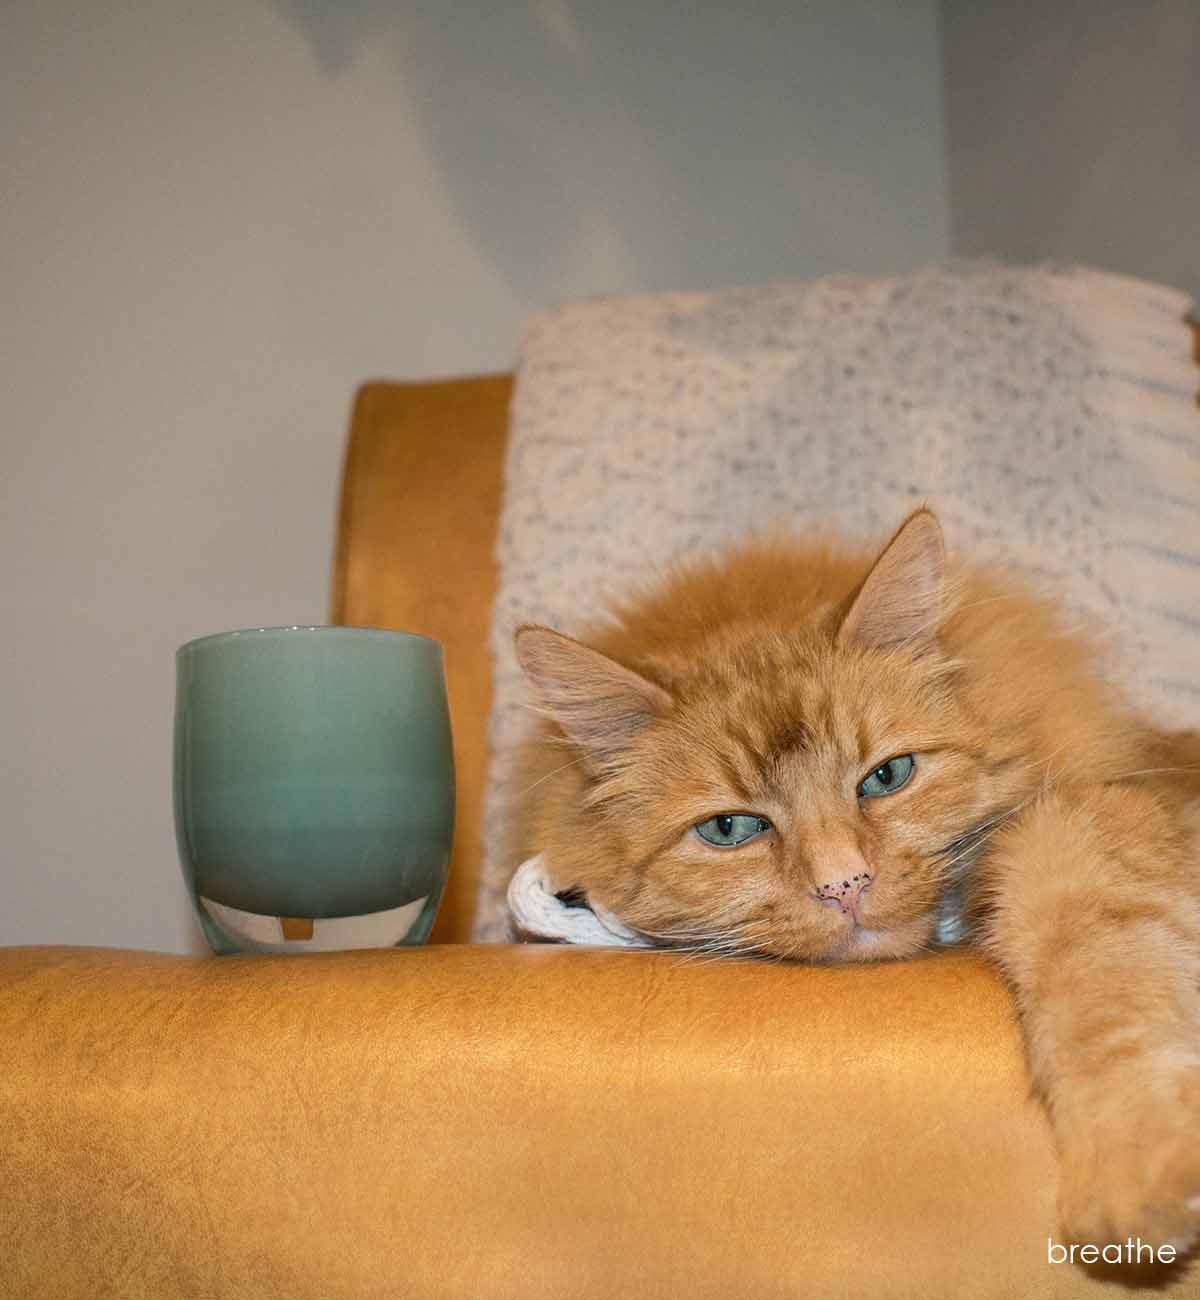 breathe a blue green hand-blown glass votive candle holder and an orange cat lounge on a leather chair.